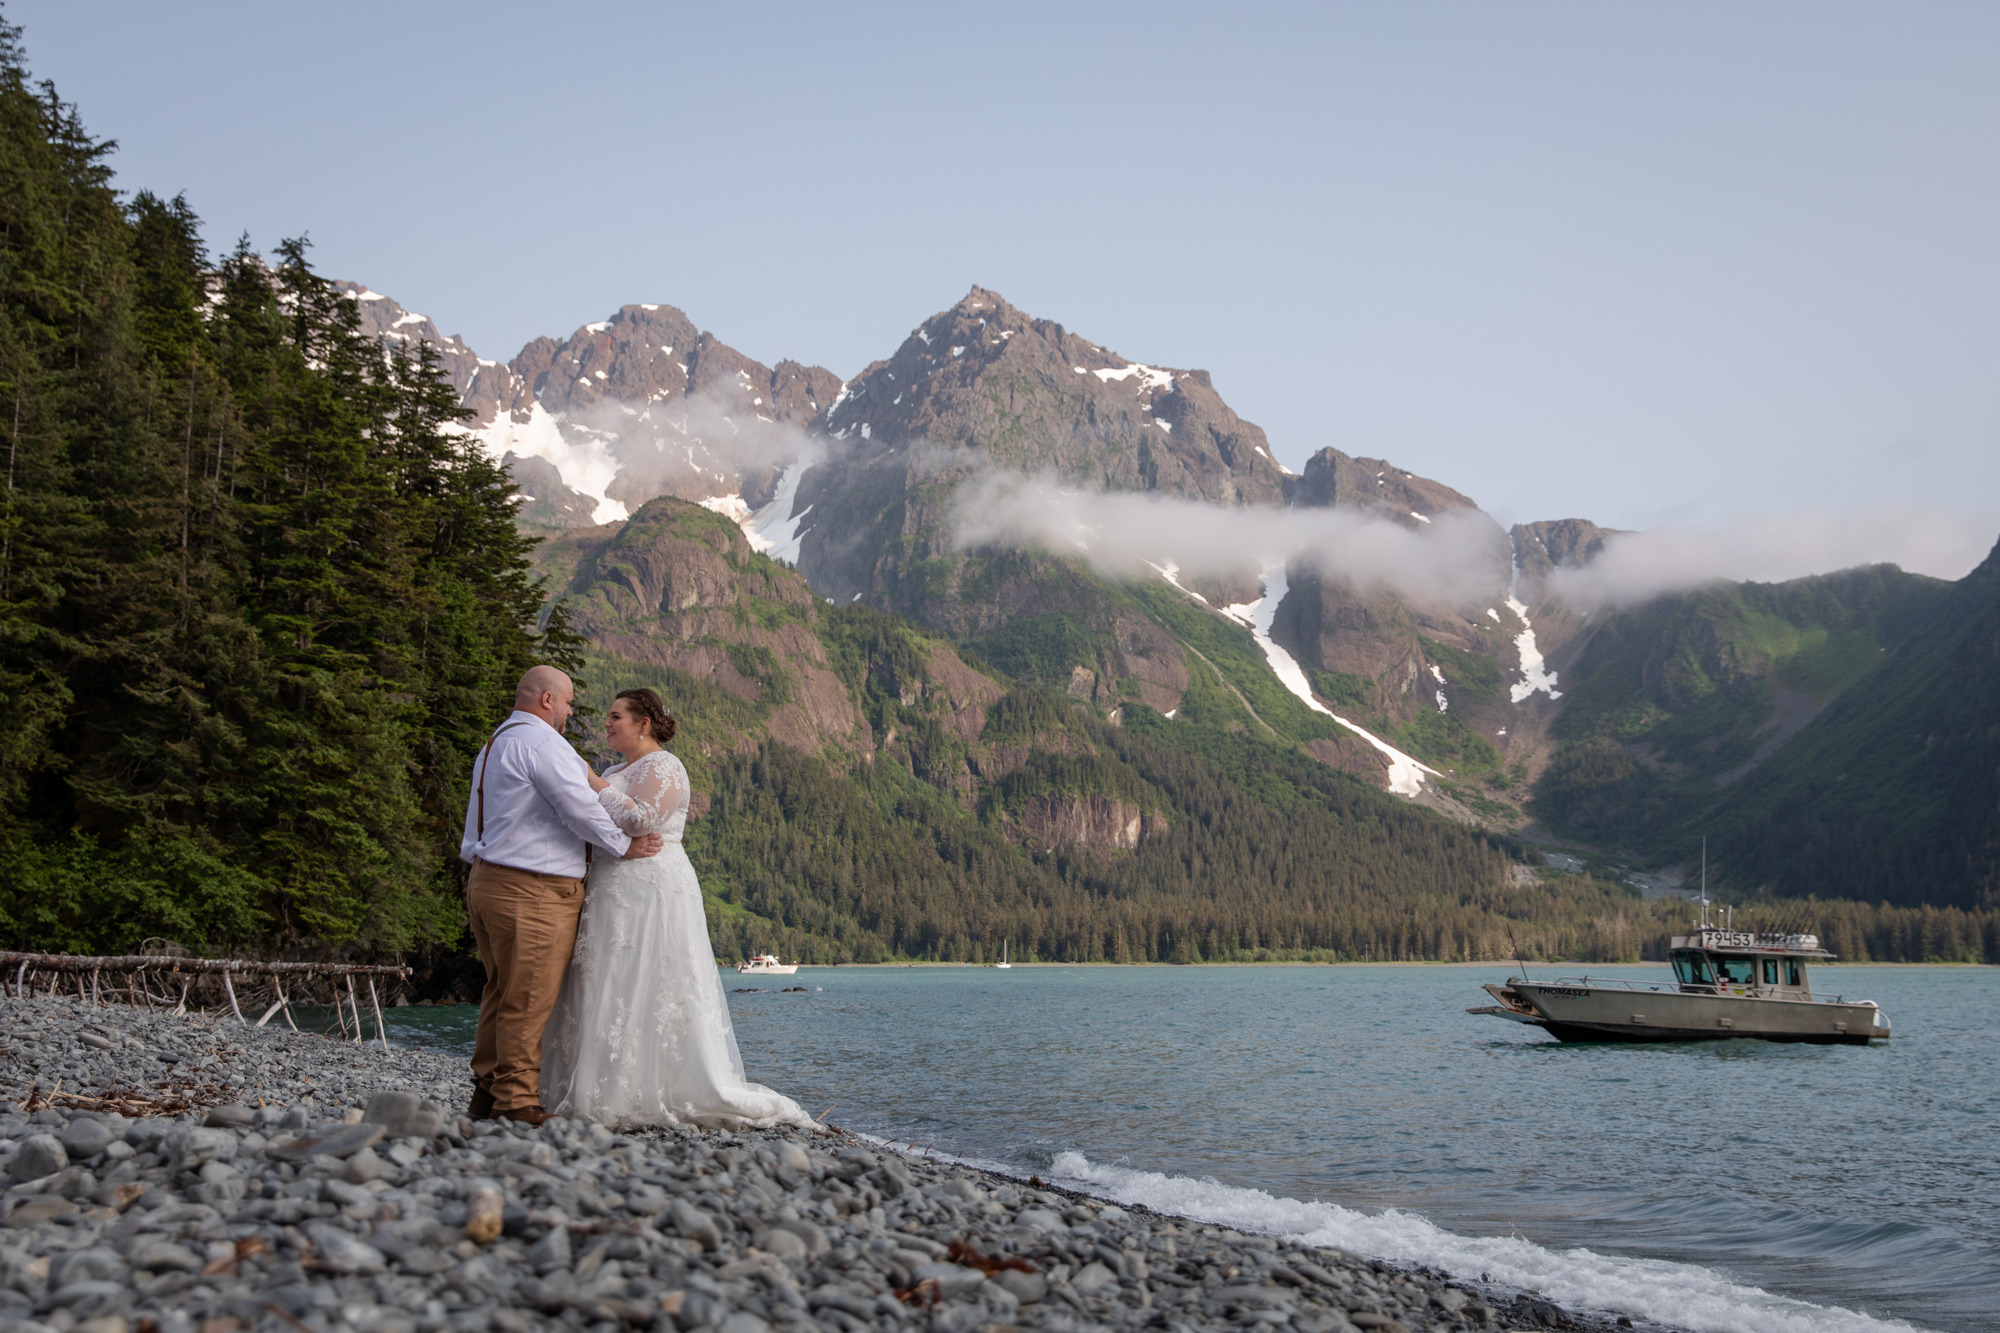 A bride and groom dance with each other on a beach in Alaska while a boat is docked in the water behind them after they signed their alaska marriage license on their wedding day.